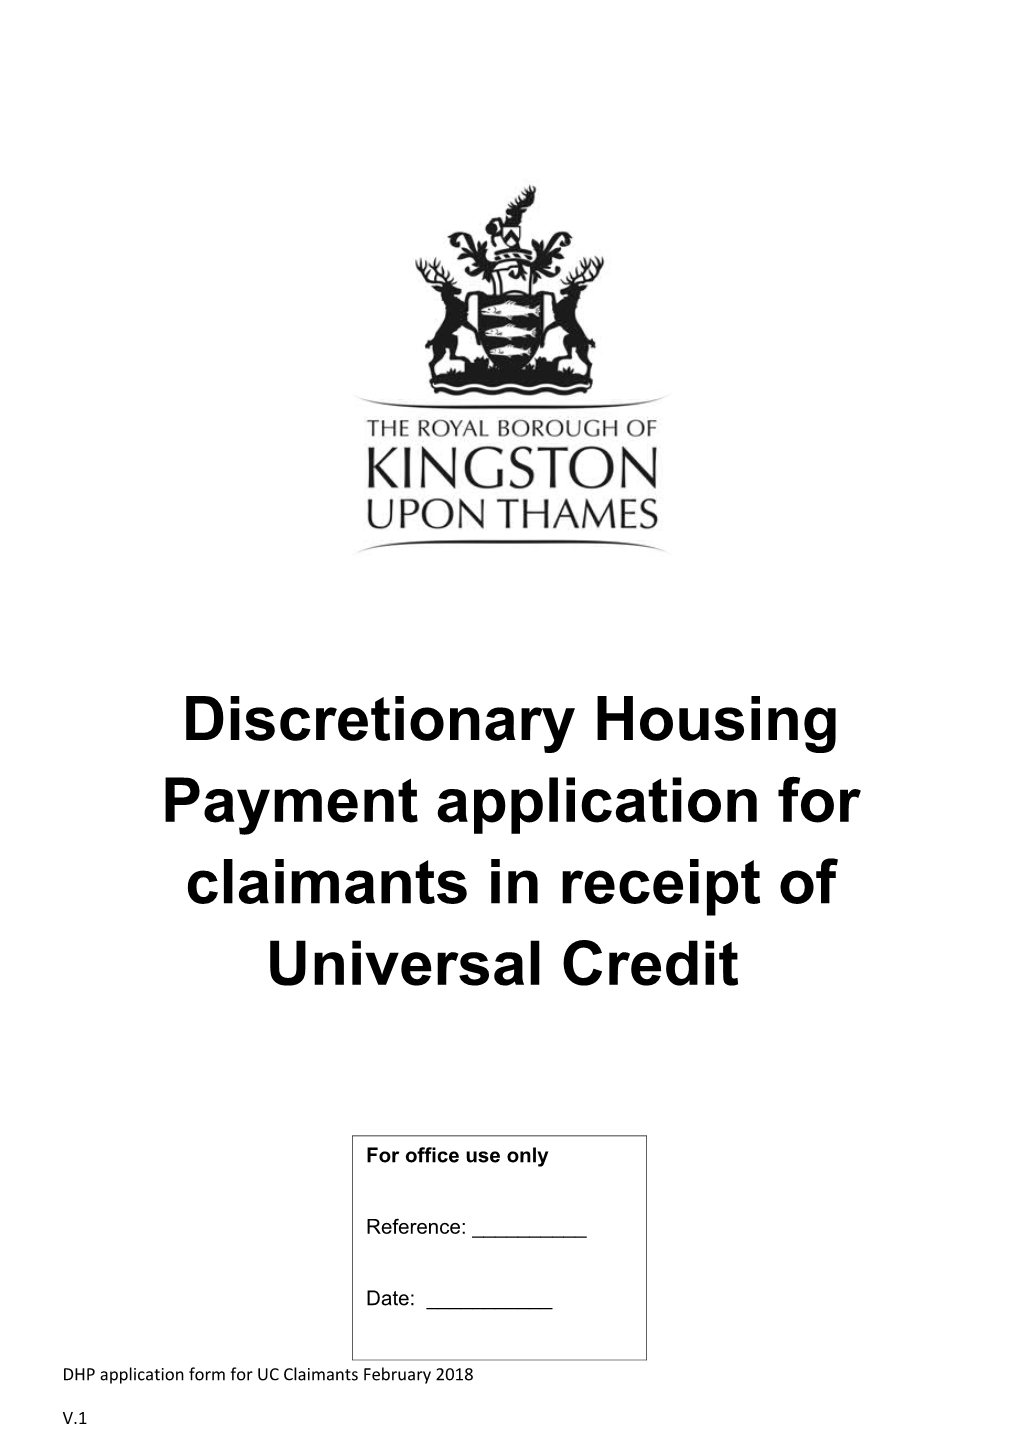 Discretionary Housing Payment Applicationfor Claimants in Receipt of Universal Credit